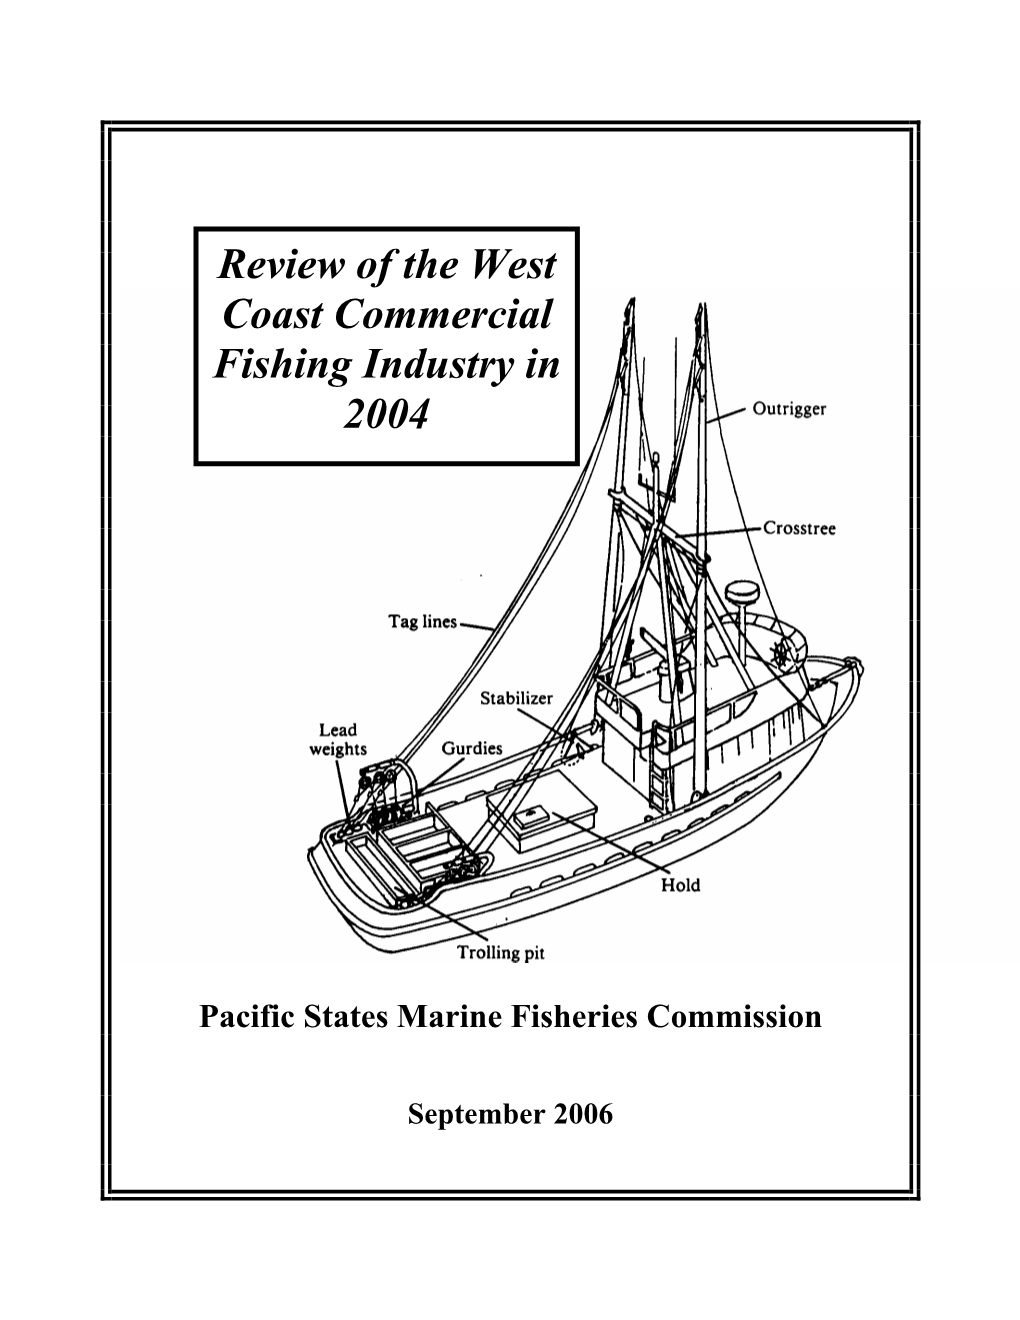 Review of the West Coast Commercial Fishing Industry in 2004